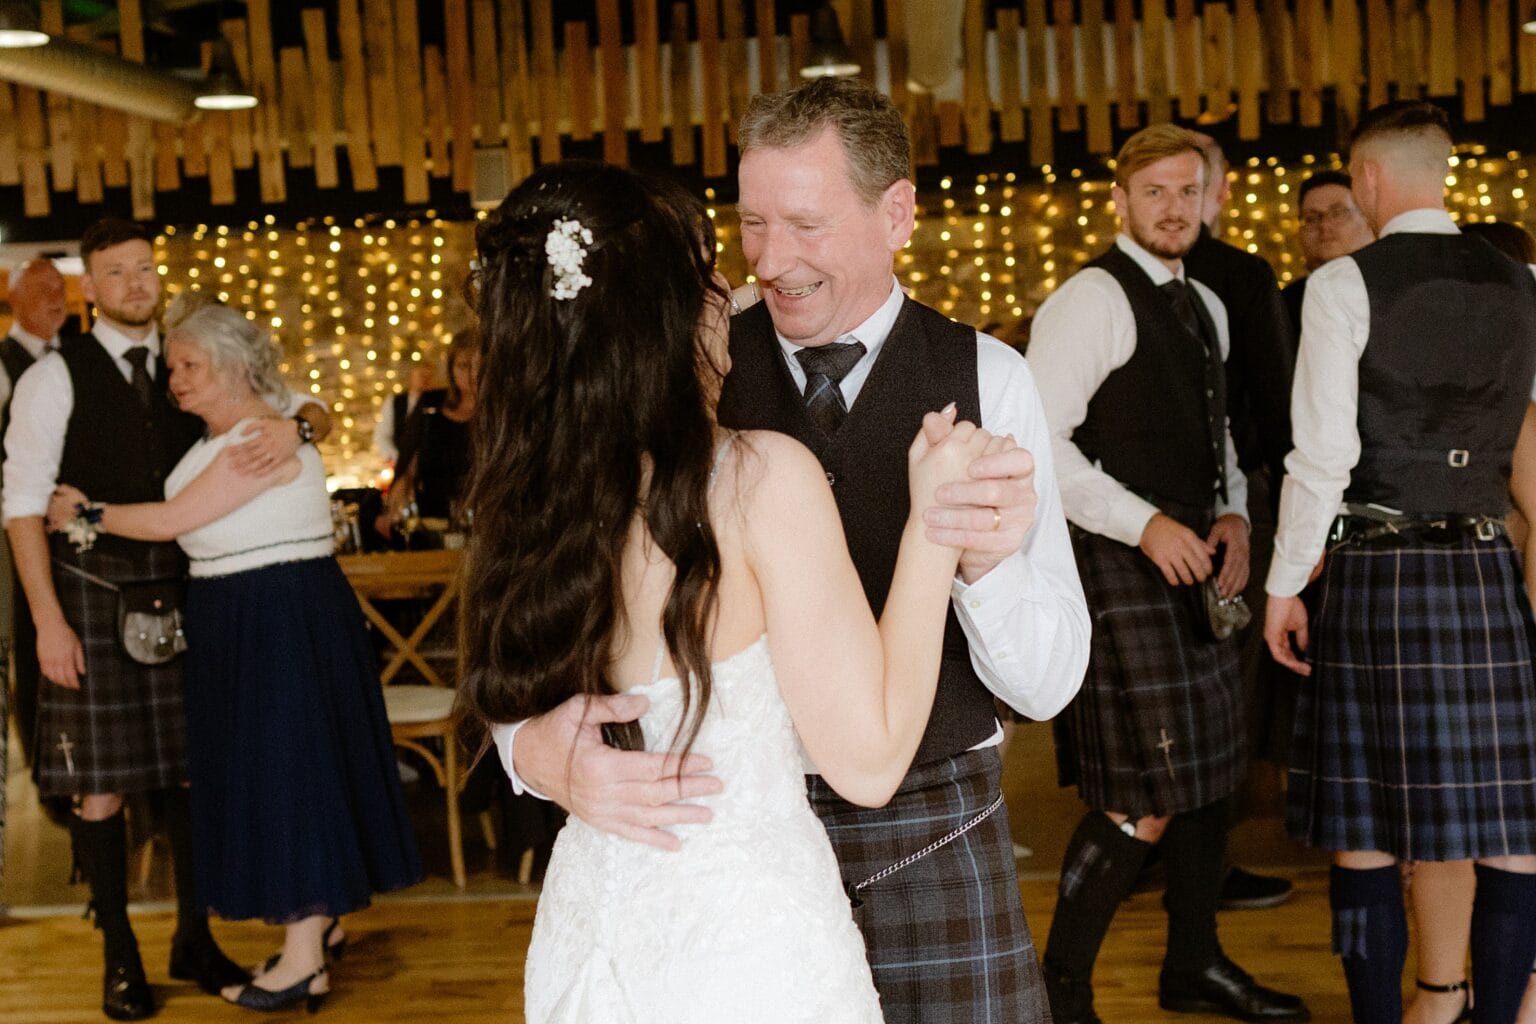 the bride and her father dance together at the evening reception following the wedding ceremony at barn wedding venues west lothian wooden paneling and strings of fairly lights are visible in the background